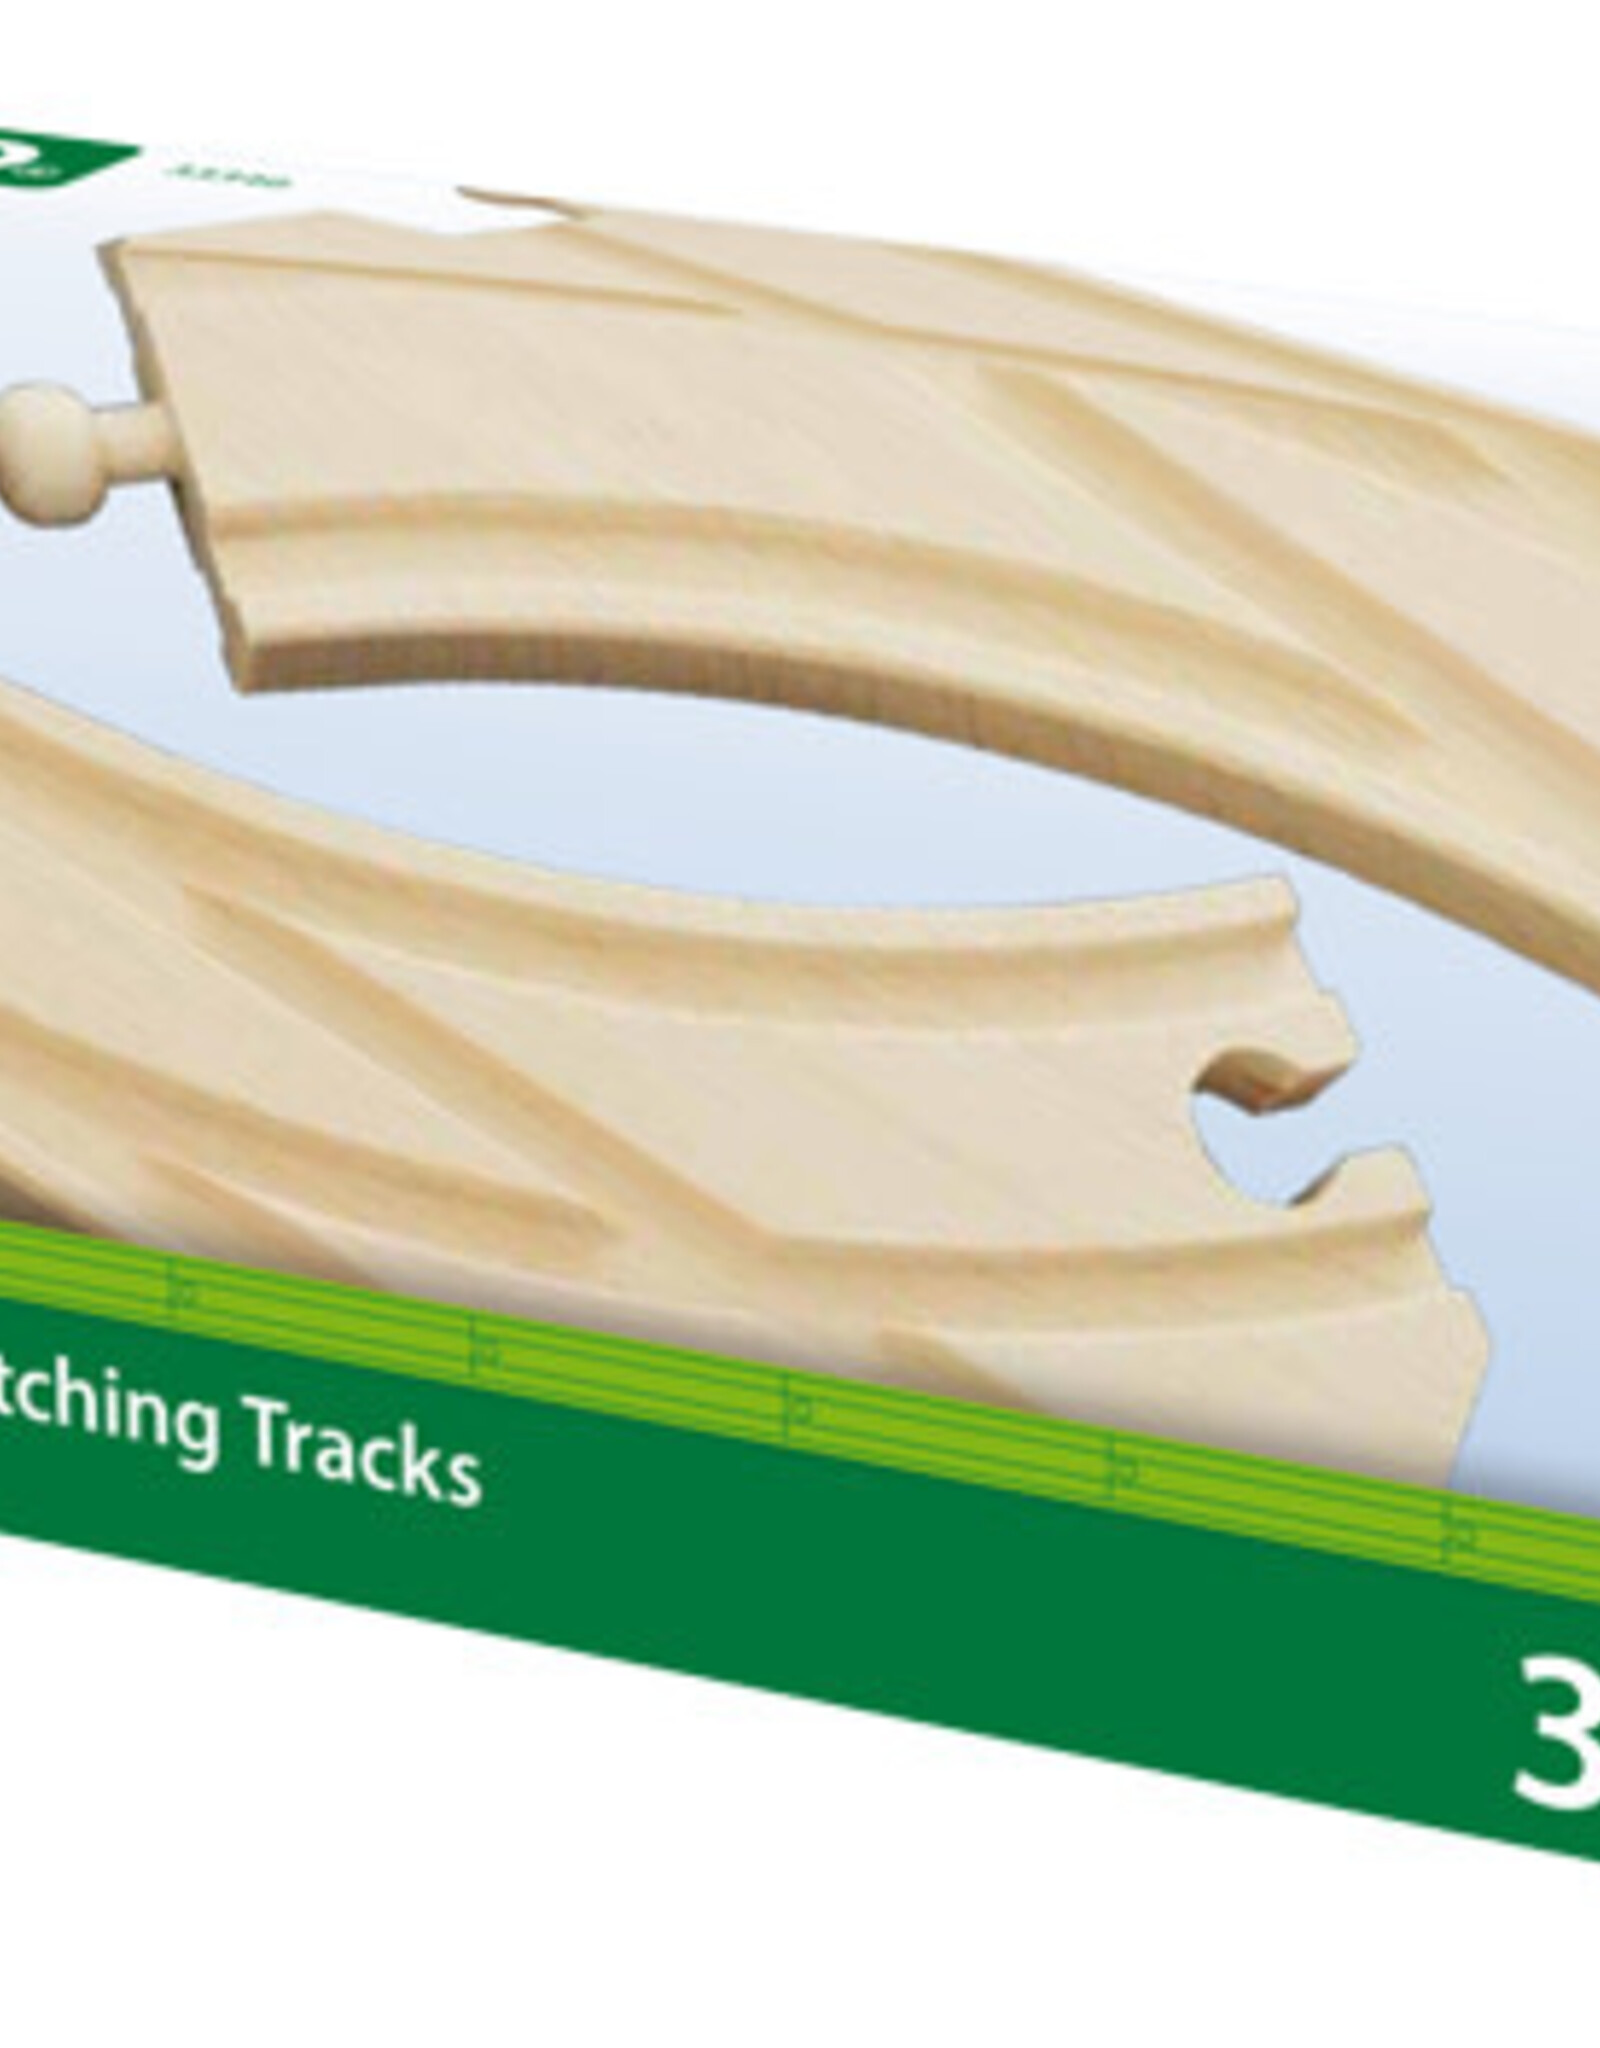 BRIO CORP Curved Switching Tracks